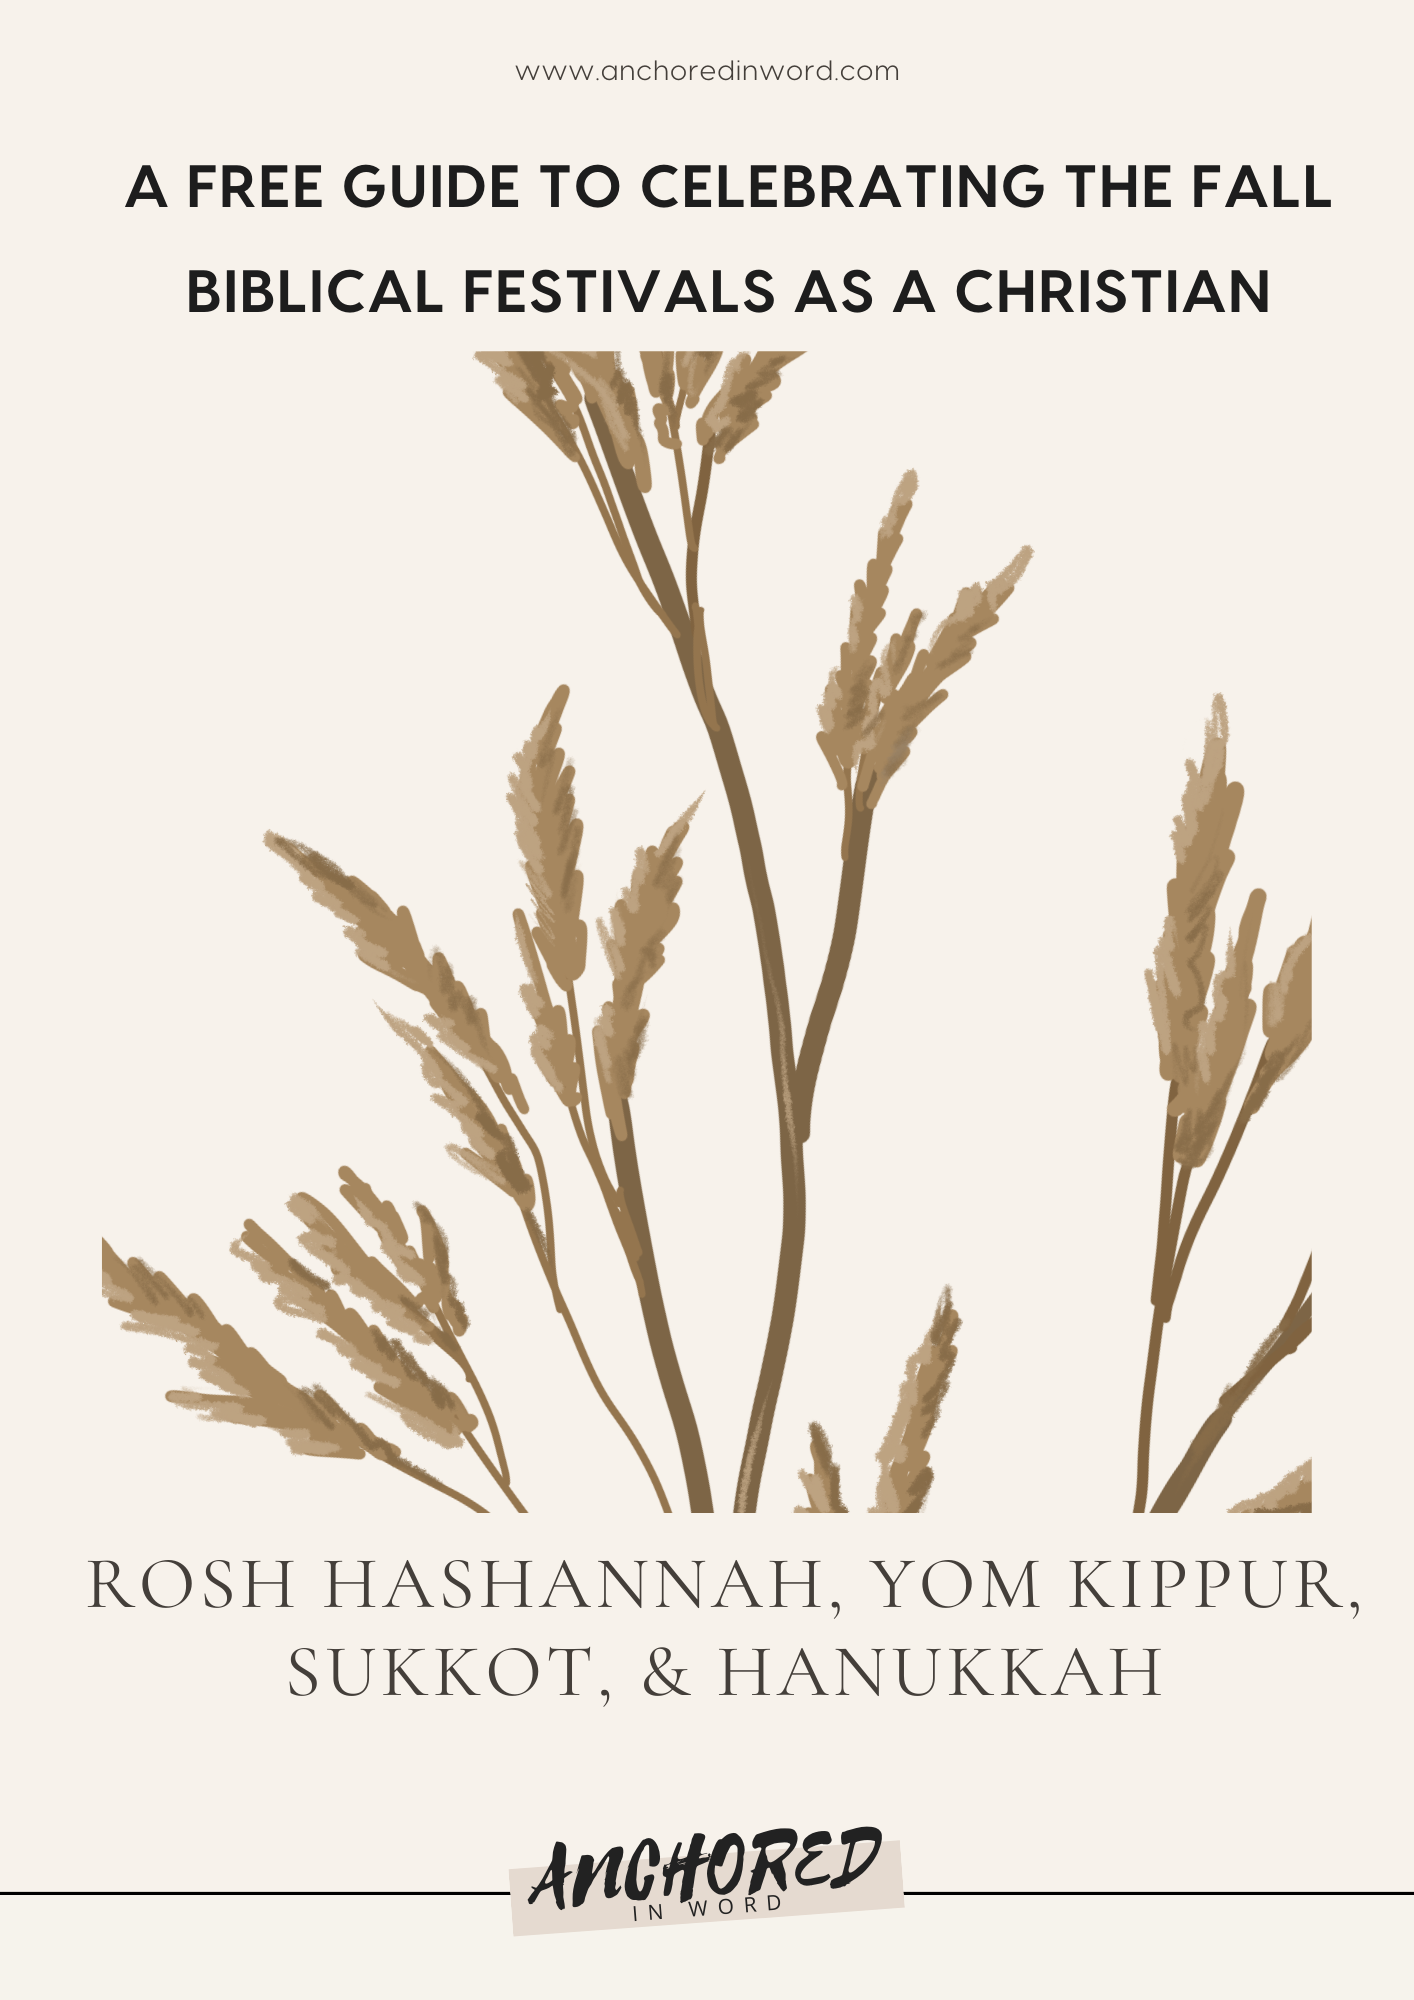 THE JEWISH FALL BIBLICAL FESTIVALS GUIDE BANNER